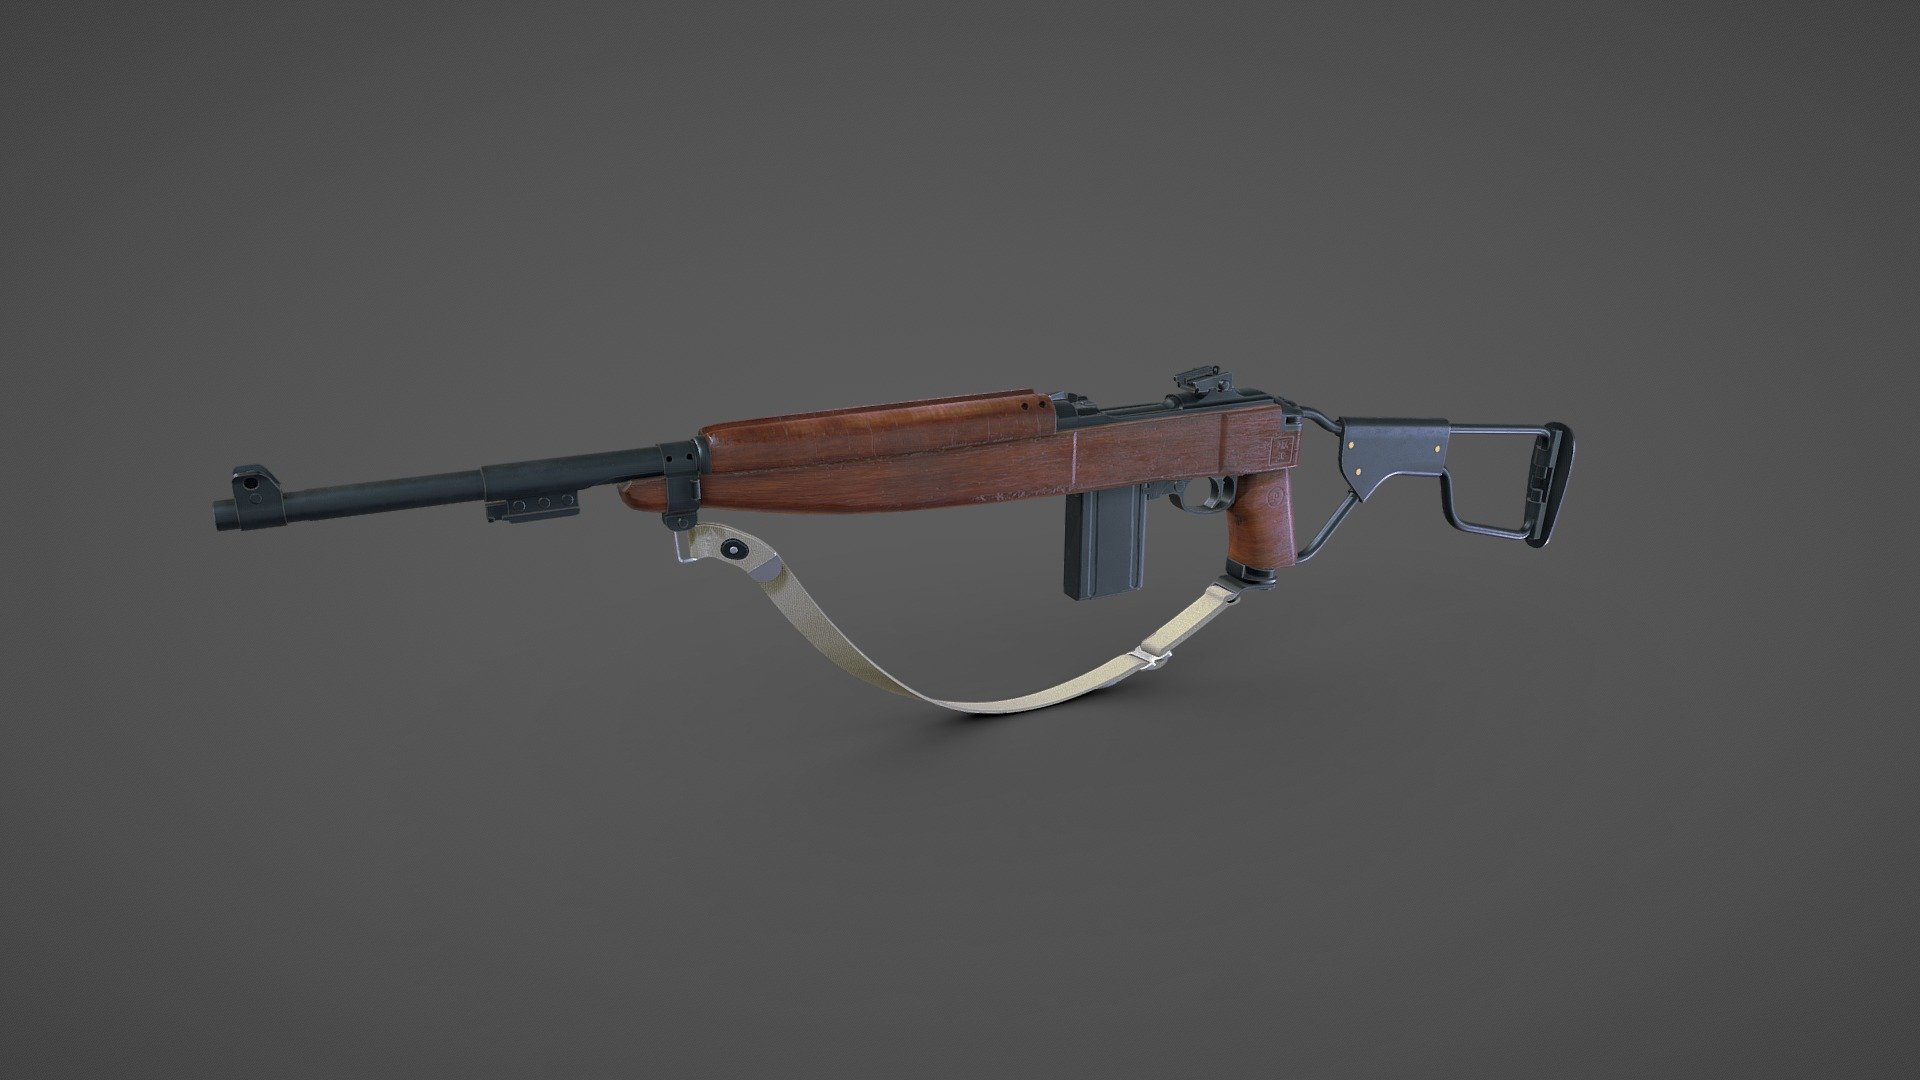 M1A1 Carbine Paratrooper




Low-poly ready to use in games, AR/VR (17,534 tris)

Textures are in PNG format 4096x4096 PBR metalness 1 set.

Available formats: MAX 2018 and 2015, OBJ, MTL, FBX, .tbscene.

Separate objects for animation.

Files unit: Centimeters.

If you need any other file format you can always request it.

All formats include materials and textures.
 - M1A1 Carbine Paratrooper - Buy Royalty Free 3D model by MaX3Dd 3d model